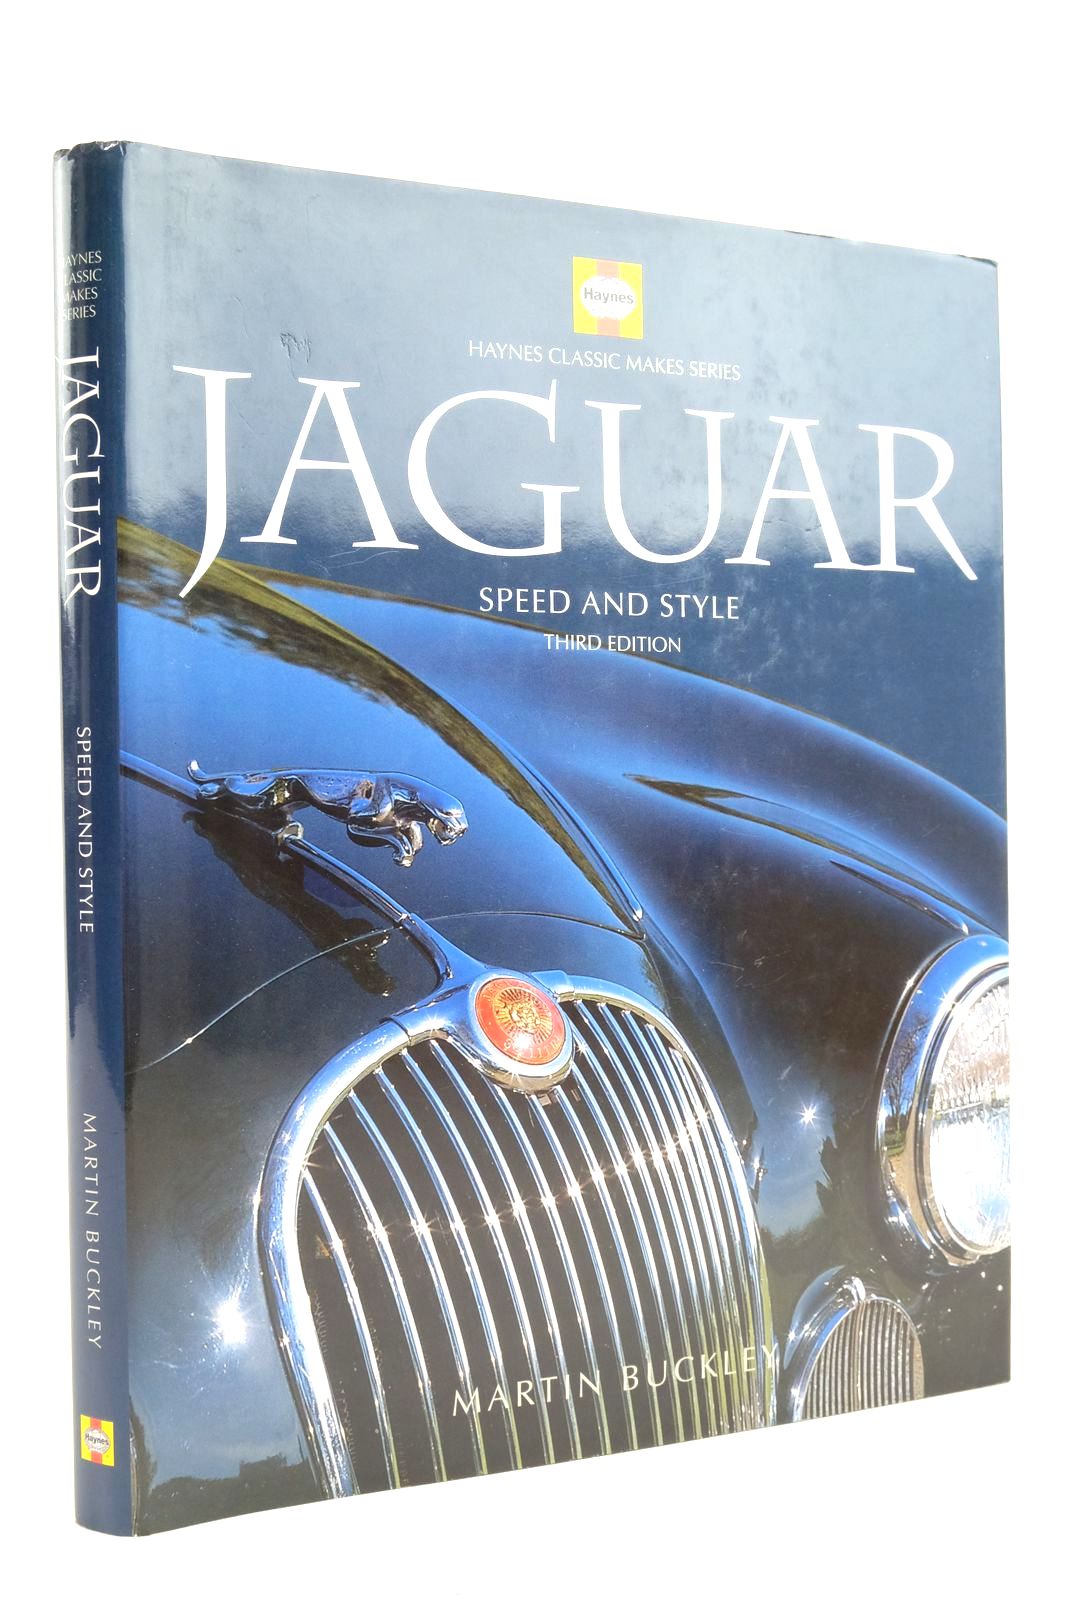 Photo of JAGUAR SPEED AND STYLE written by Buckley, Martin published by Haynes Publishing Group (STOCK CODE: 2136030)  for sale by Stella & Rose's Books